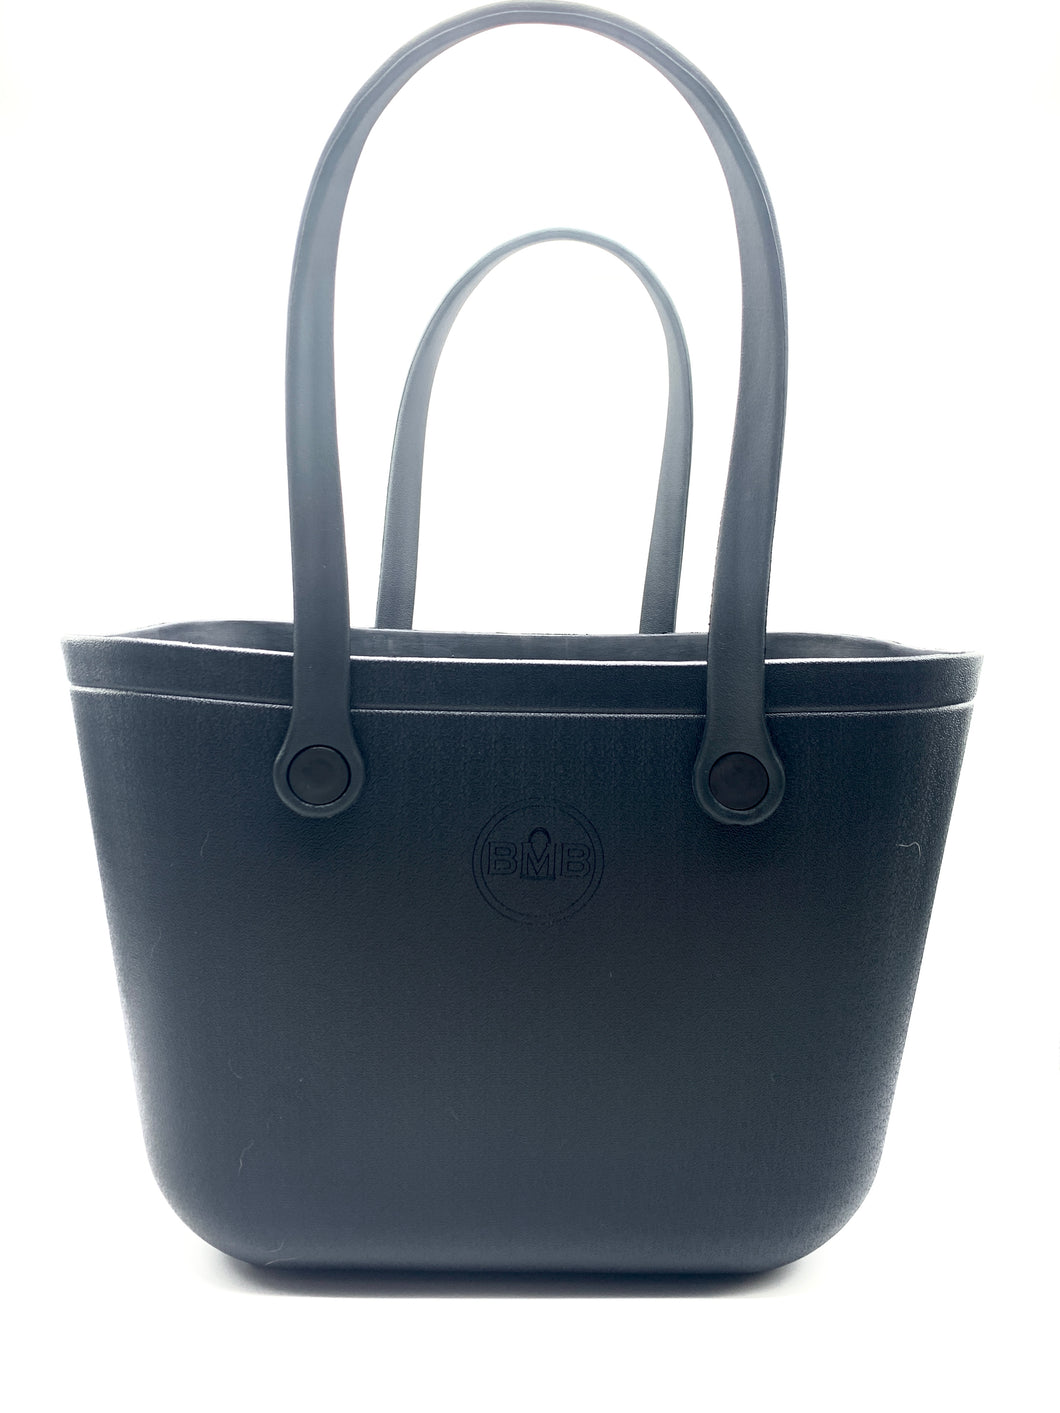 Be Me “Beach” Extra Large Tote- Black